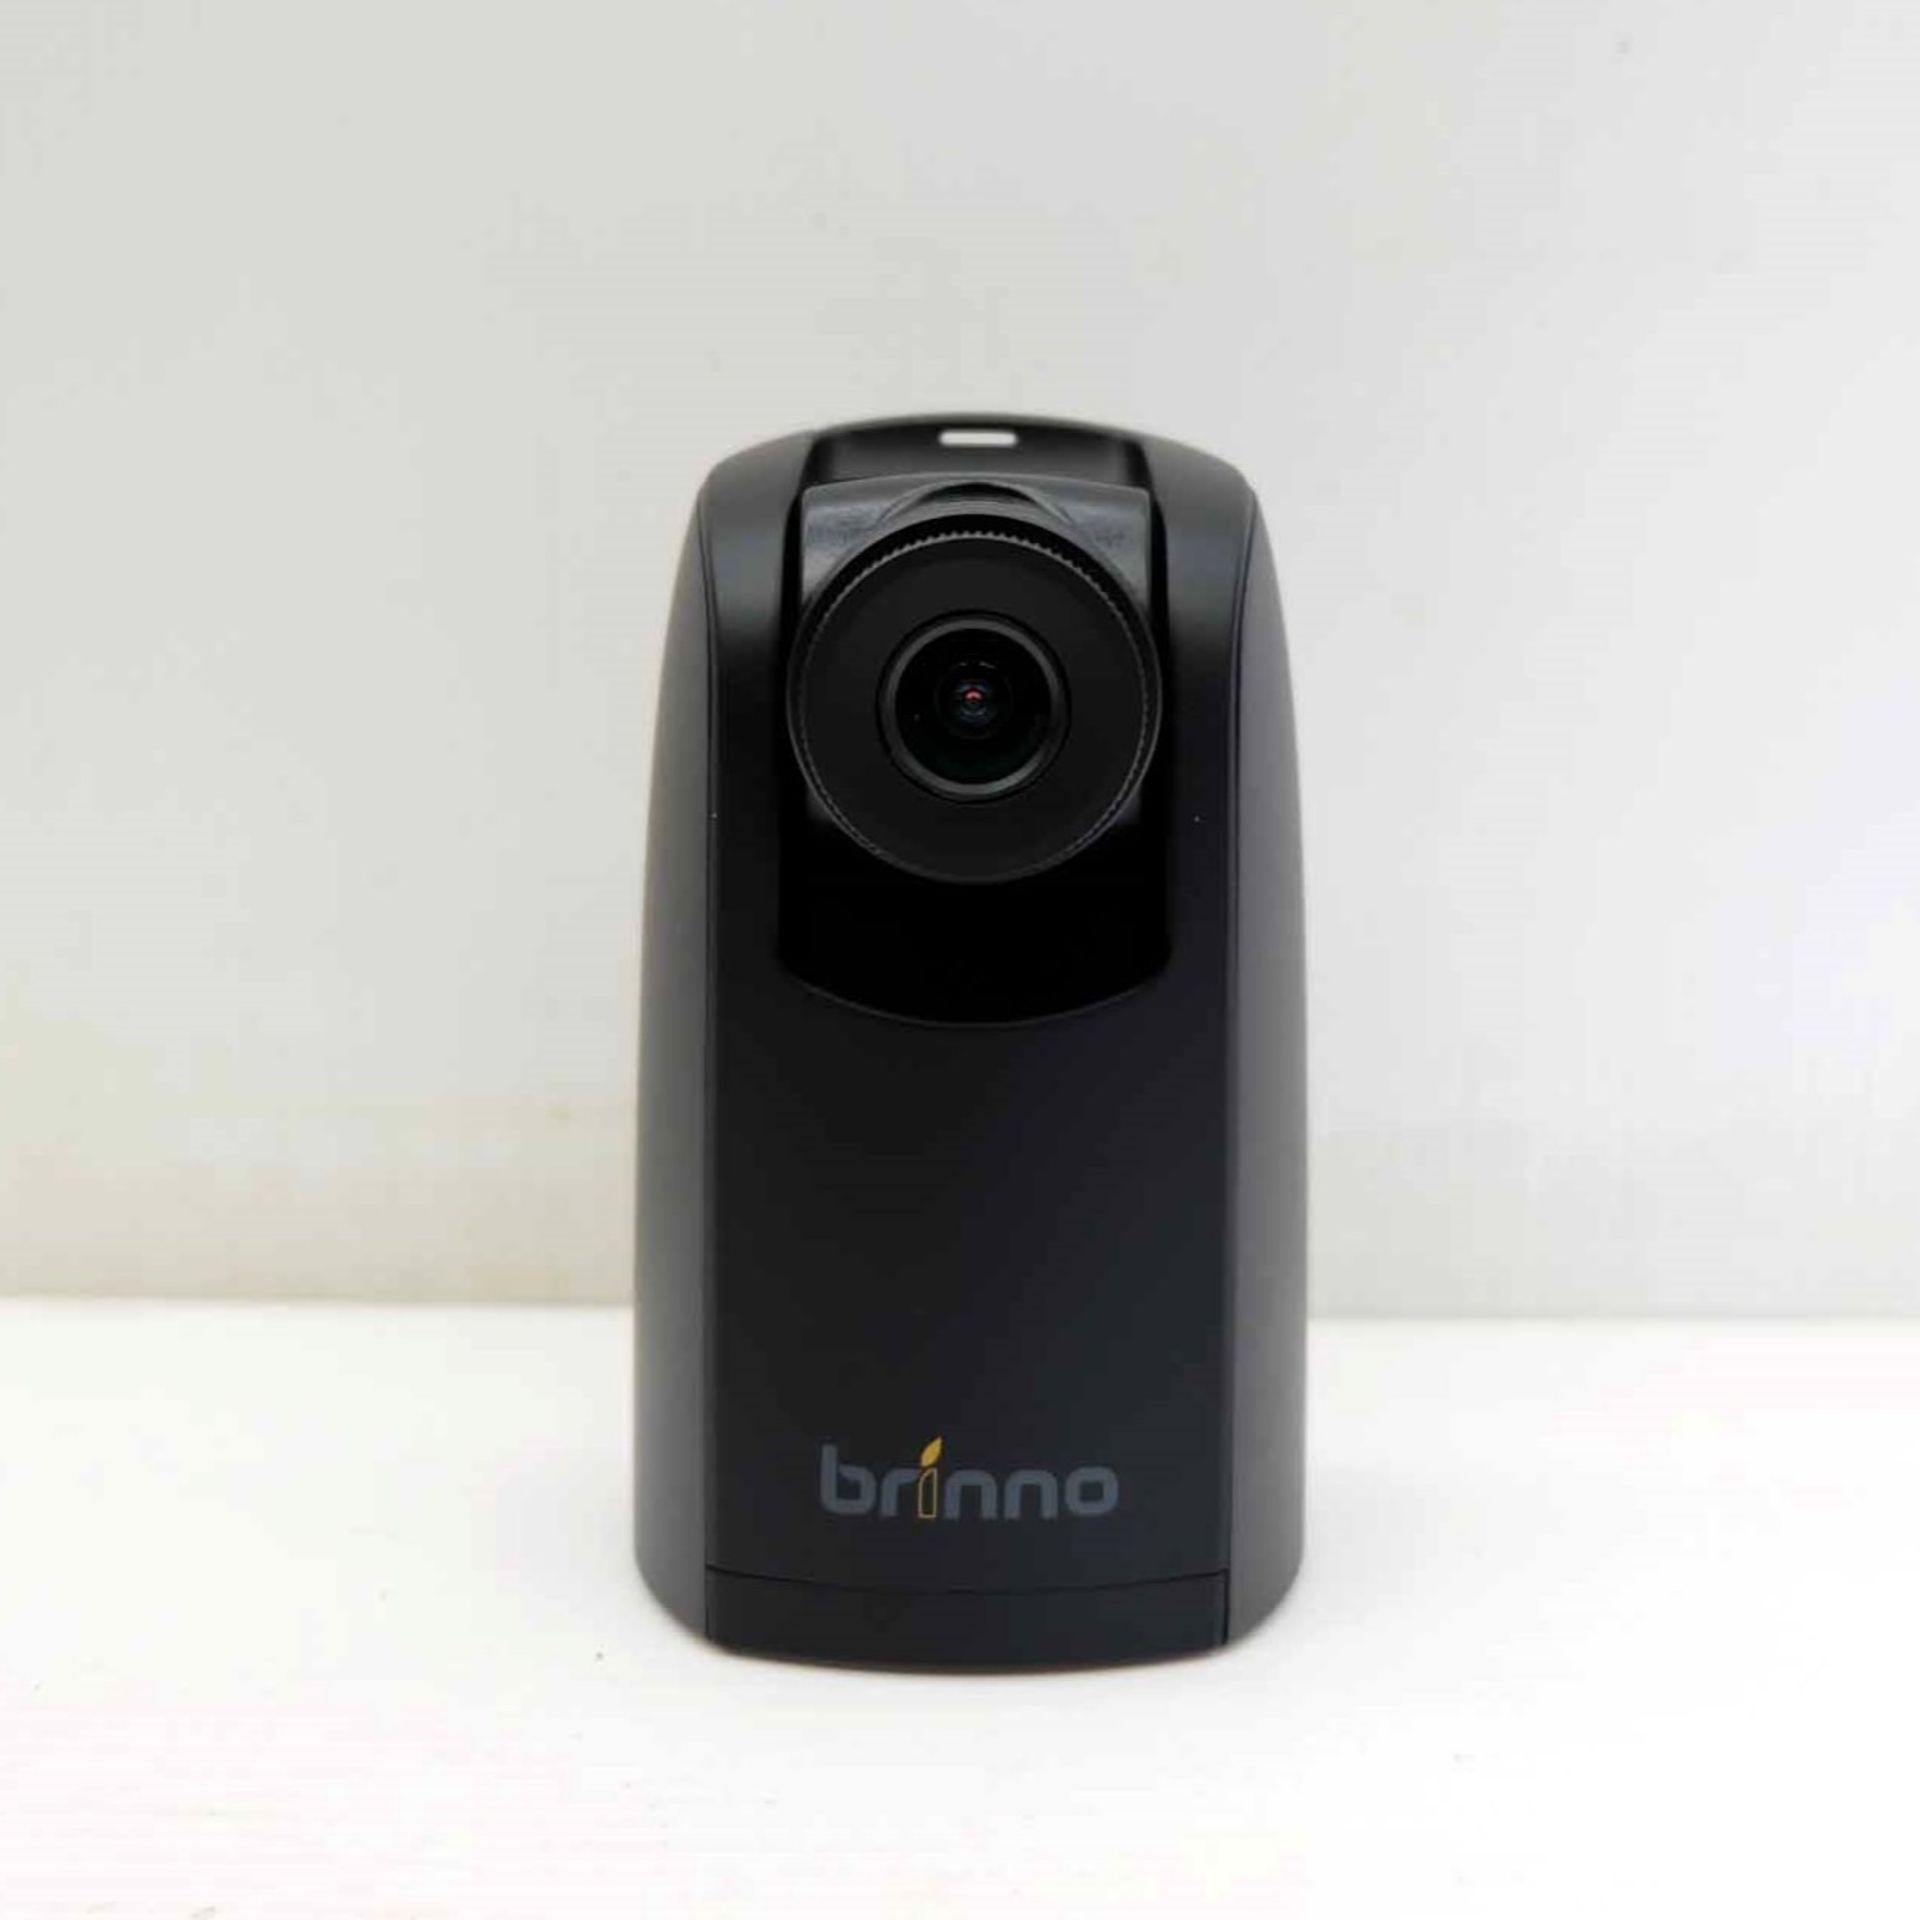 Brinno TLC200Pro Time Lapse Camera. In Waterproof Protective Case. Battery Operated. - Image 5 of 7